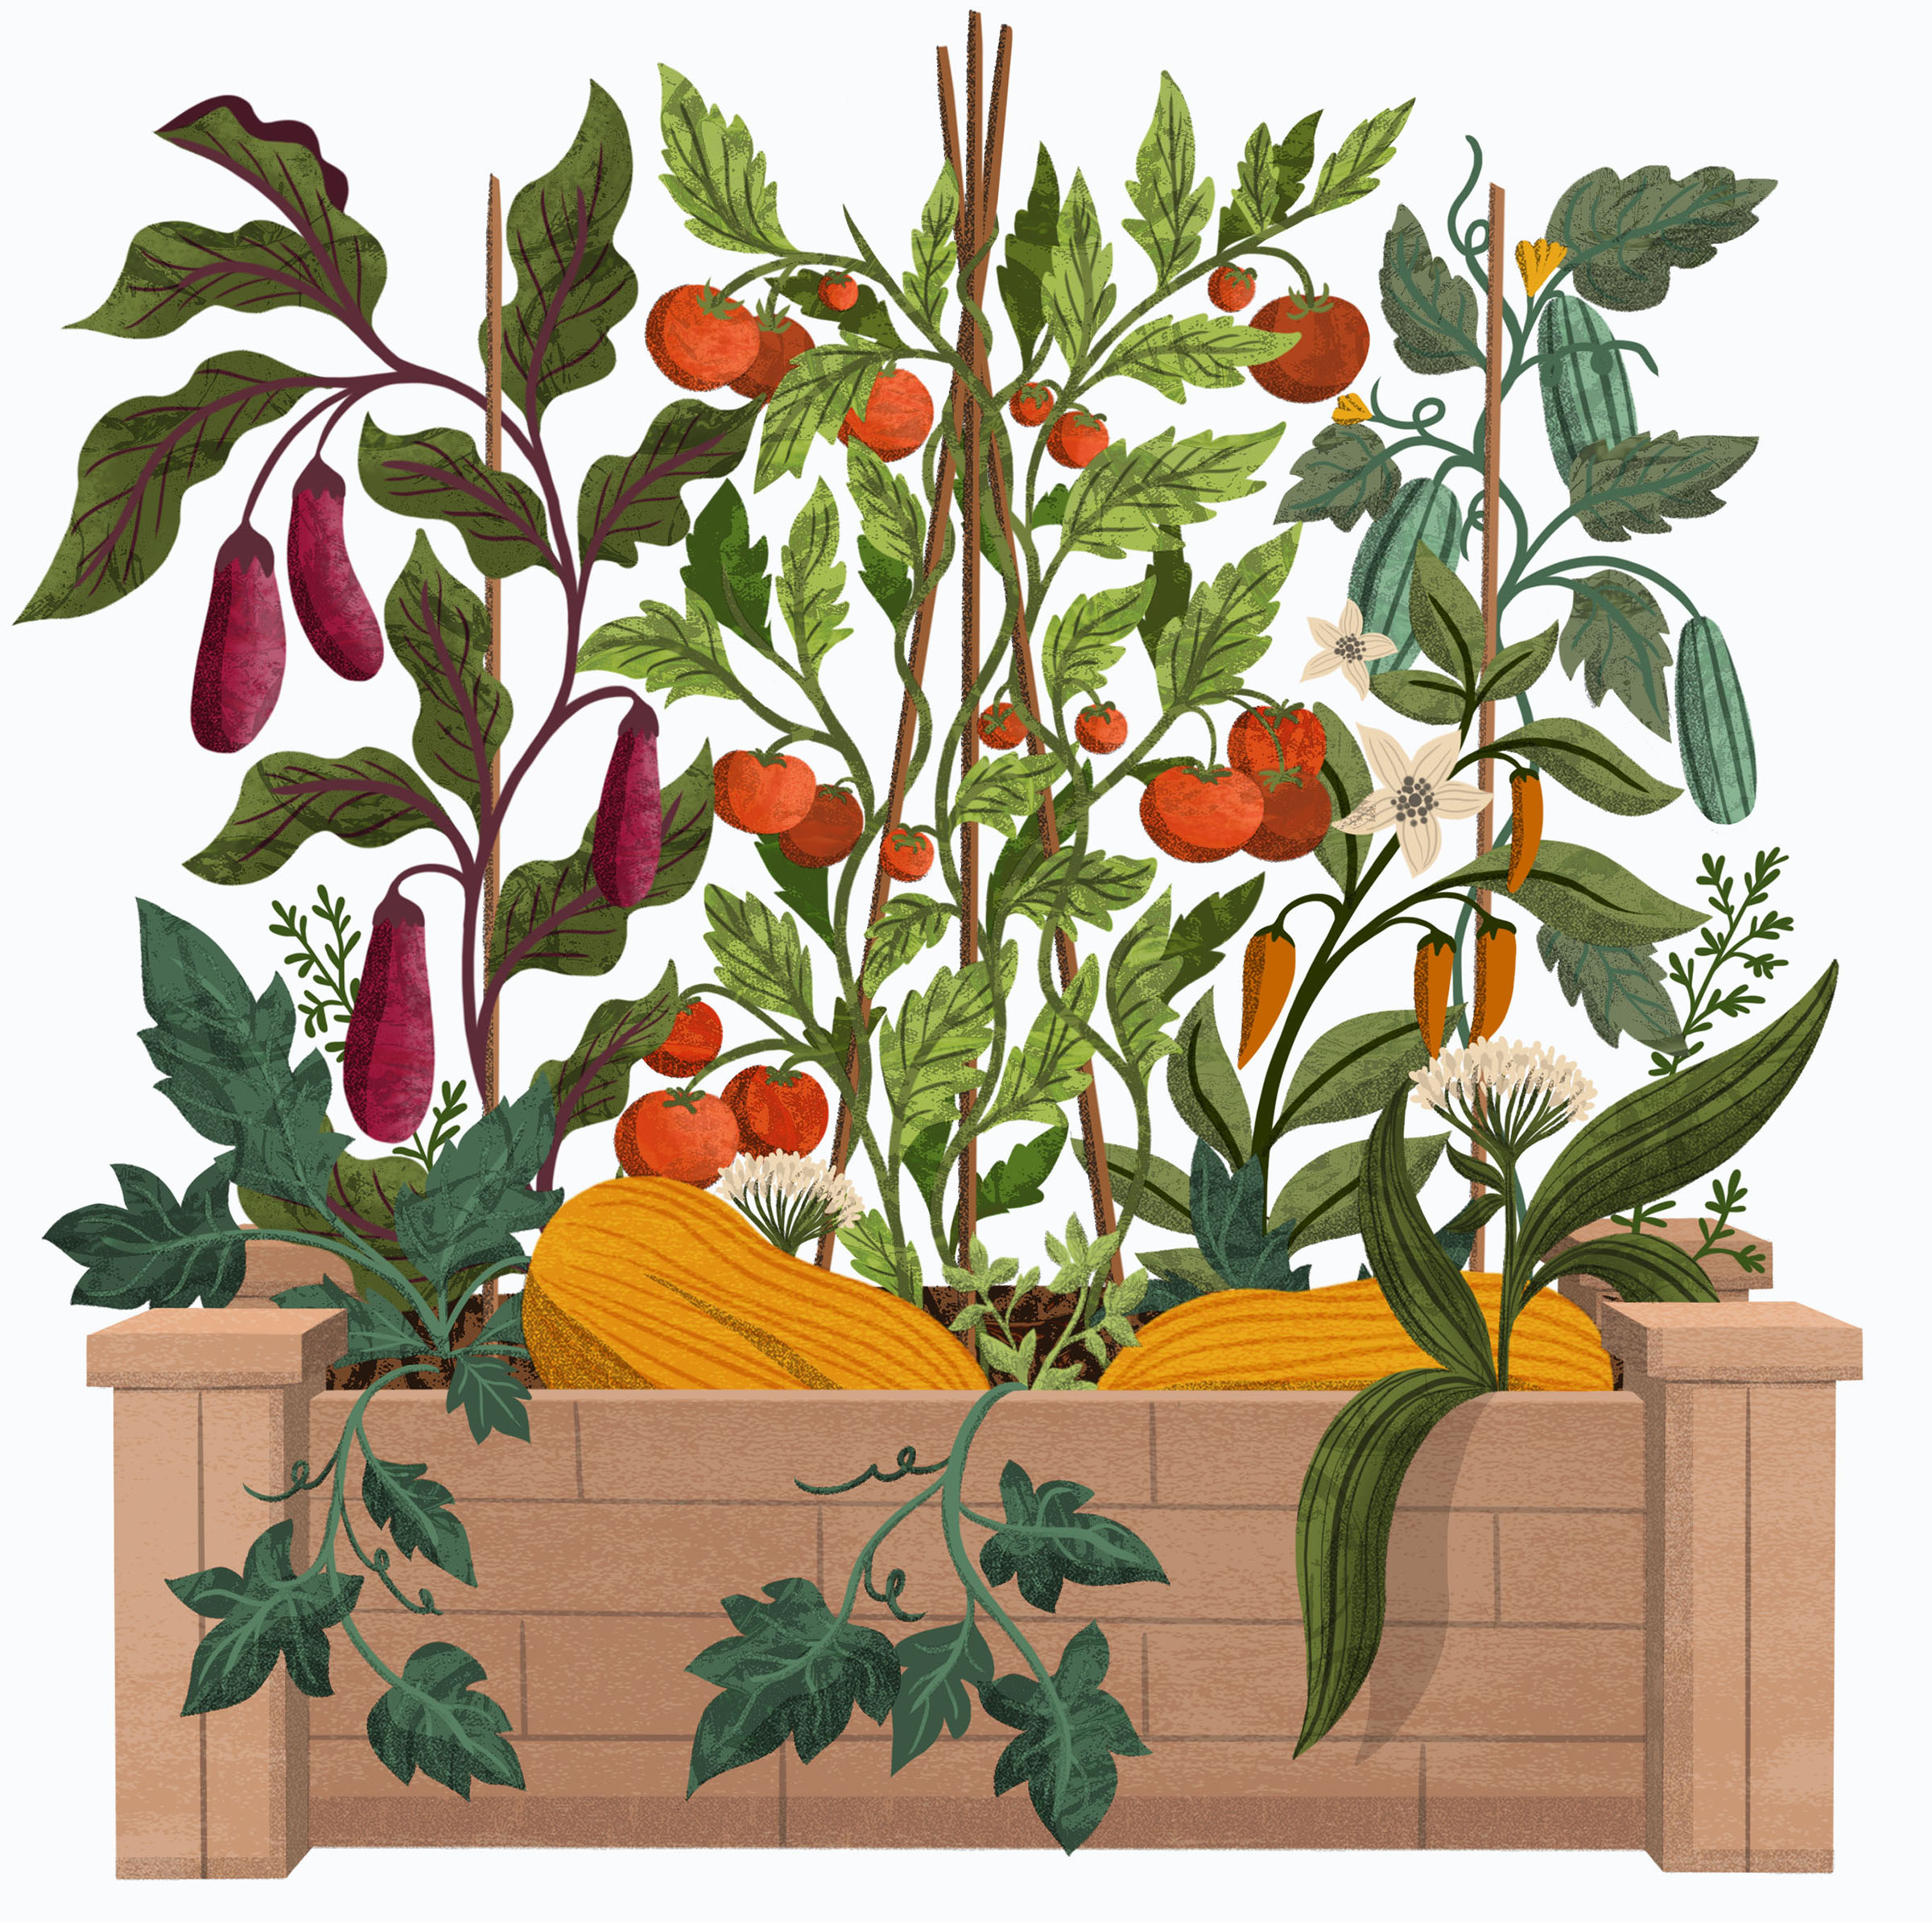 An illustration of vegetables growing vertically in a garden